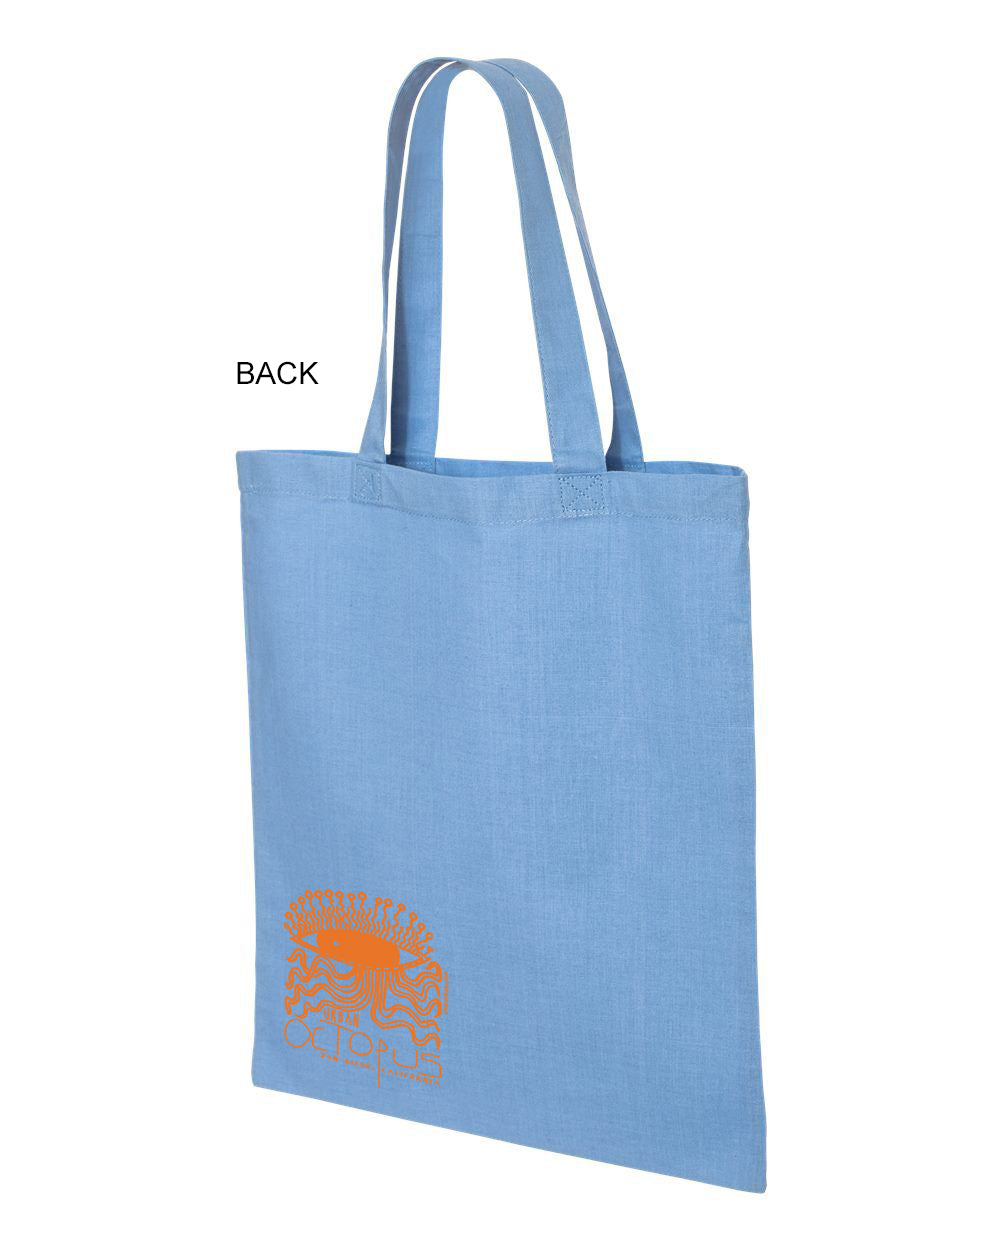 "Motion Picture" Tote canvas bag